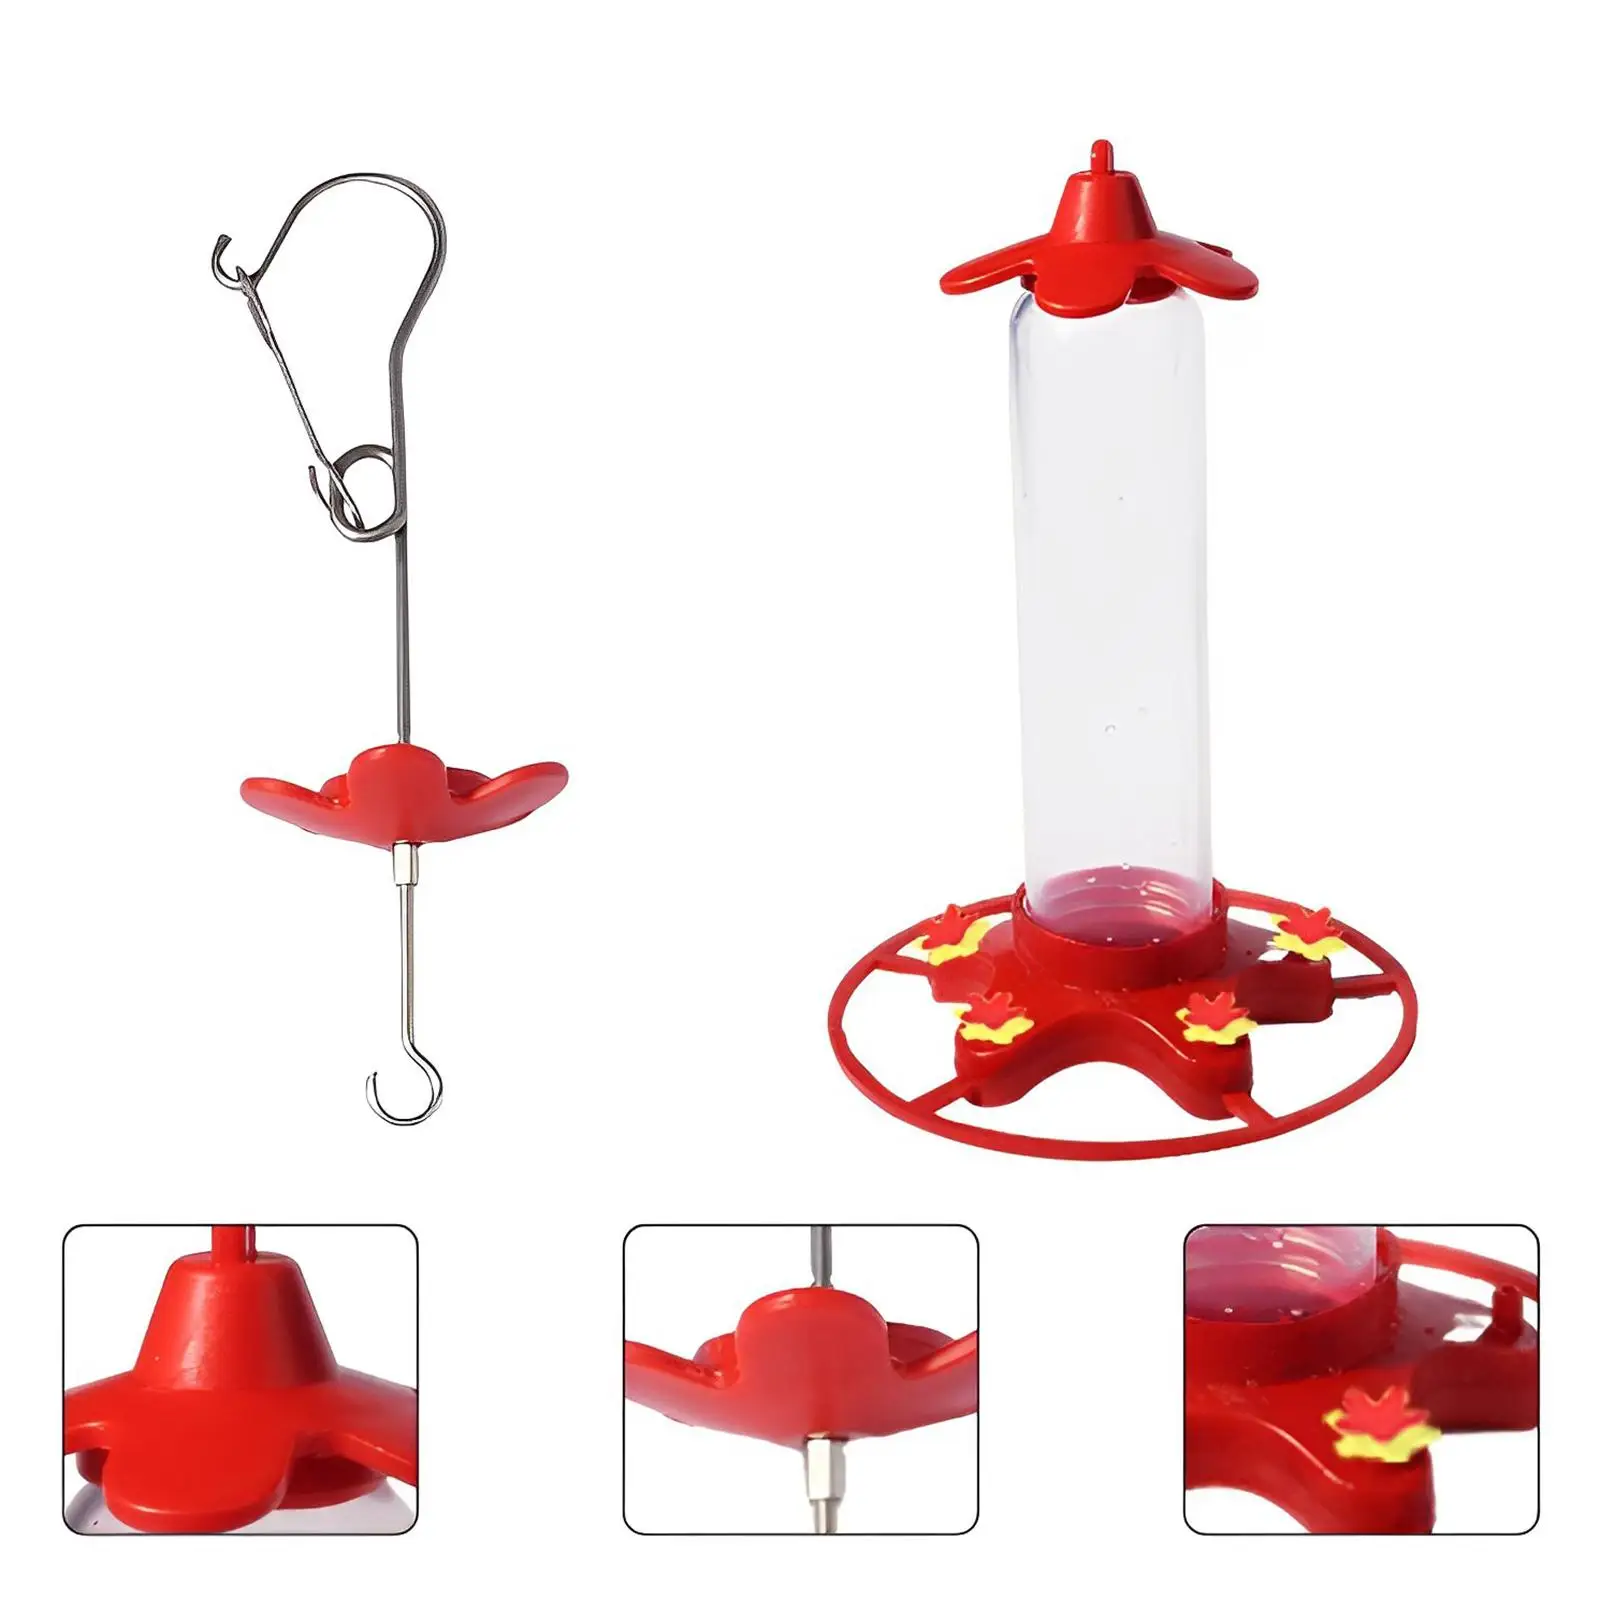 Bird Feeder 10 ounces Easy to Clean Decoration Water Feeder Station Compact Hummingbird Feeder for Outdoor Deck Yard